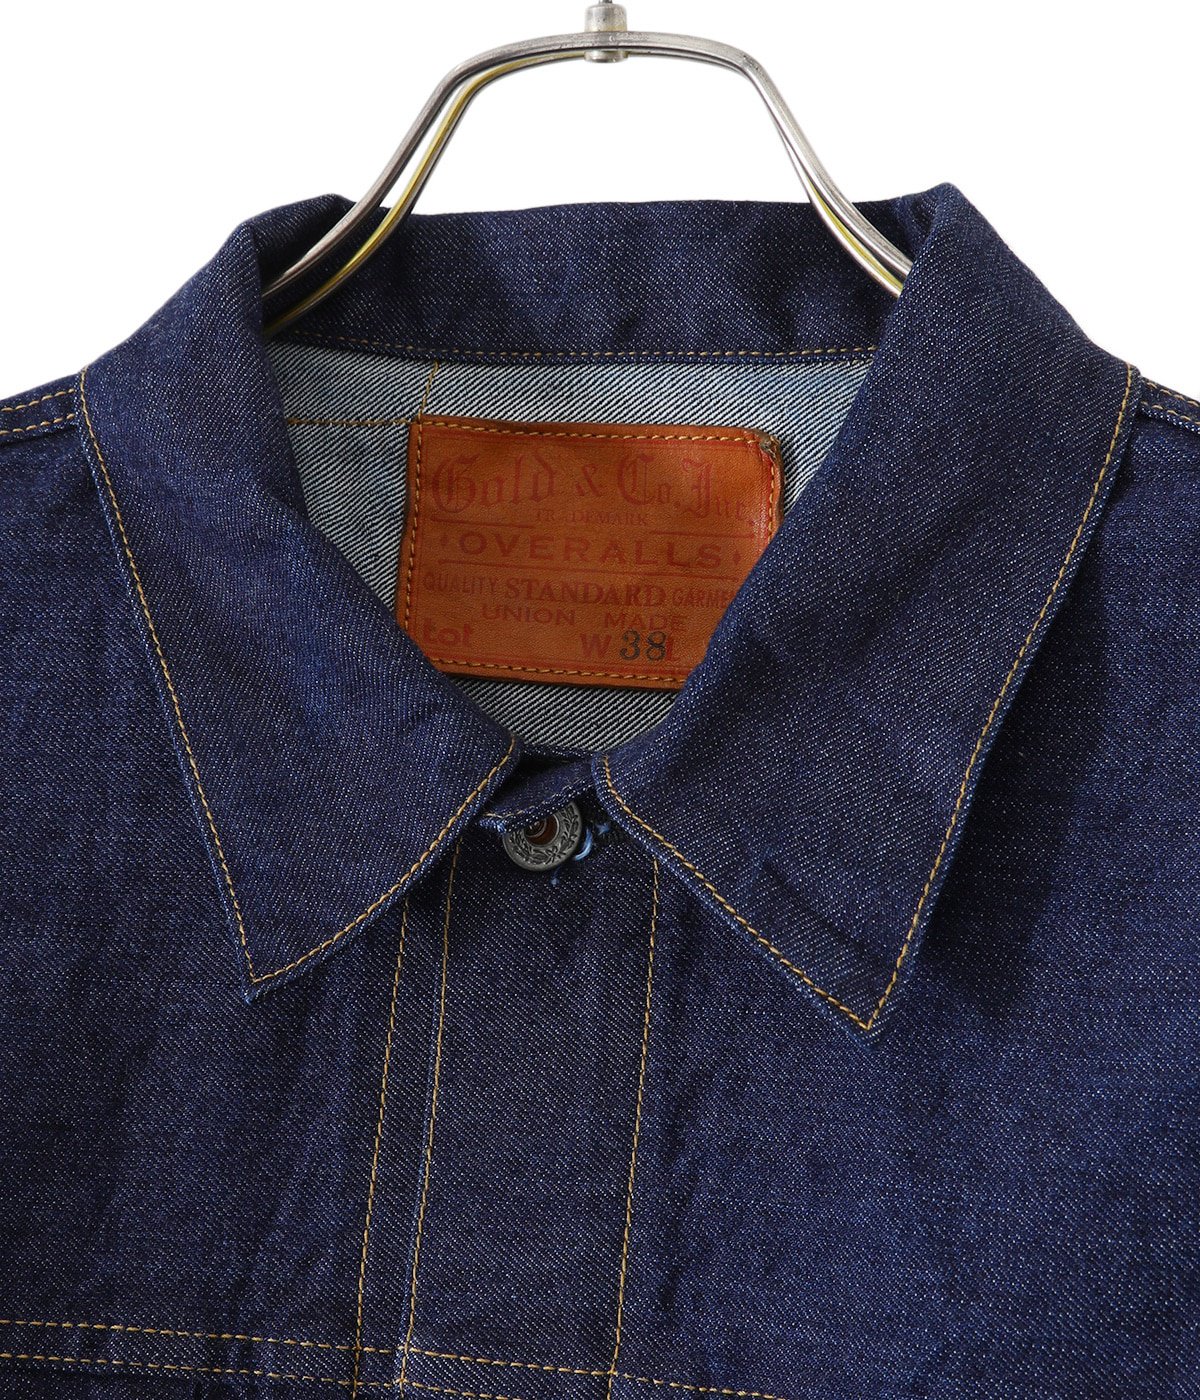 【ONLY ARK】別注 11oz SUVIN COTTON BLUE DENIM PLEATED BLOUSE - ARKnets 25th anniversary MODEL -